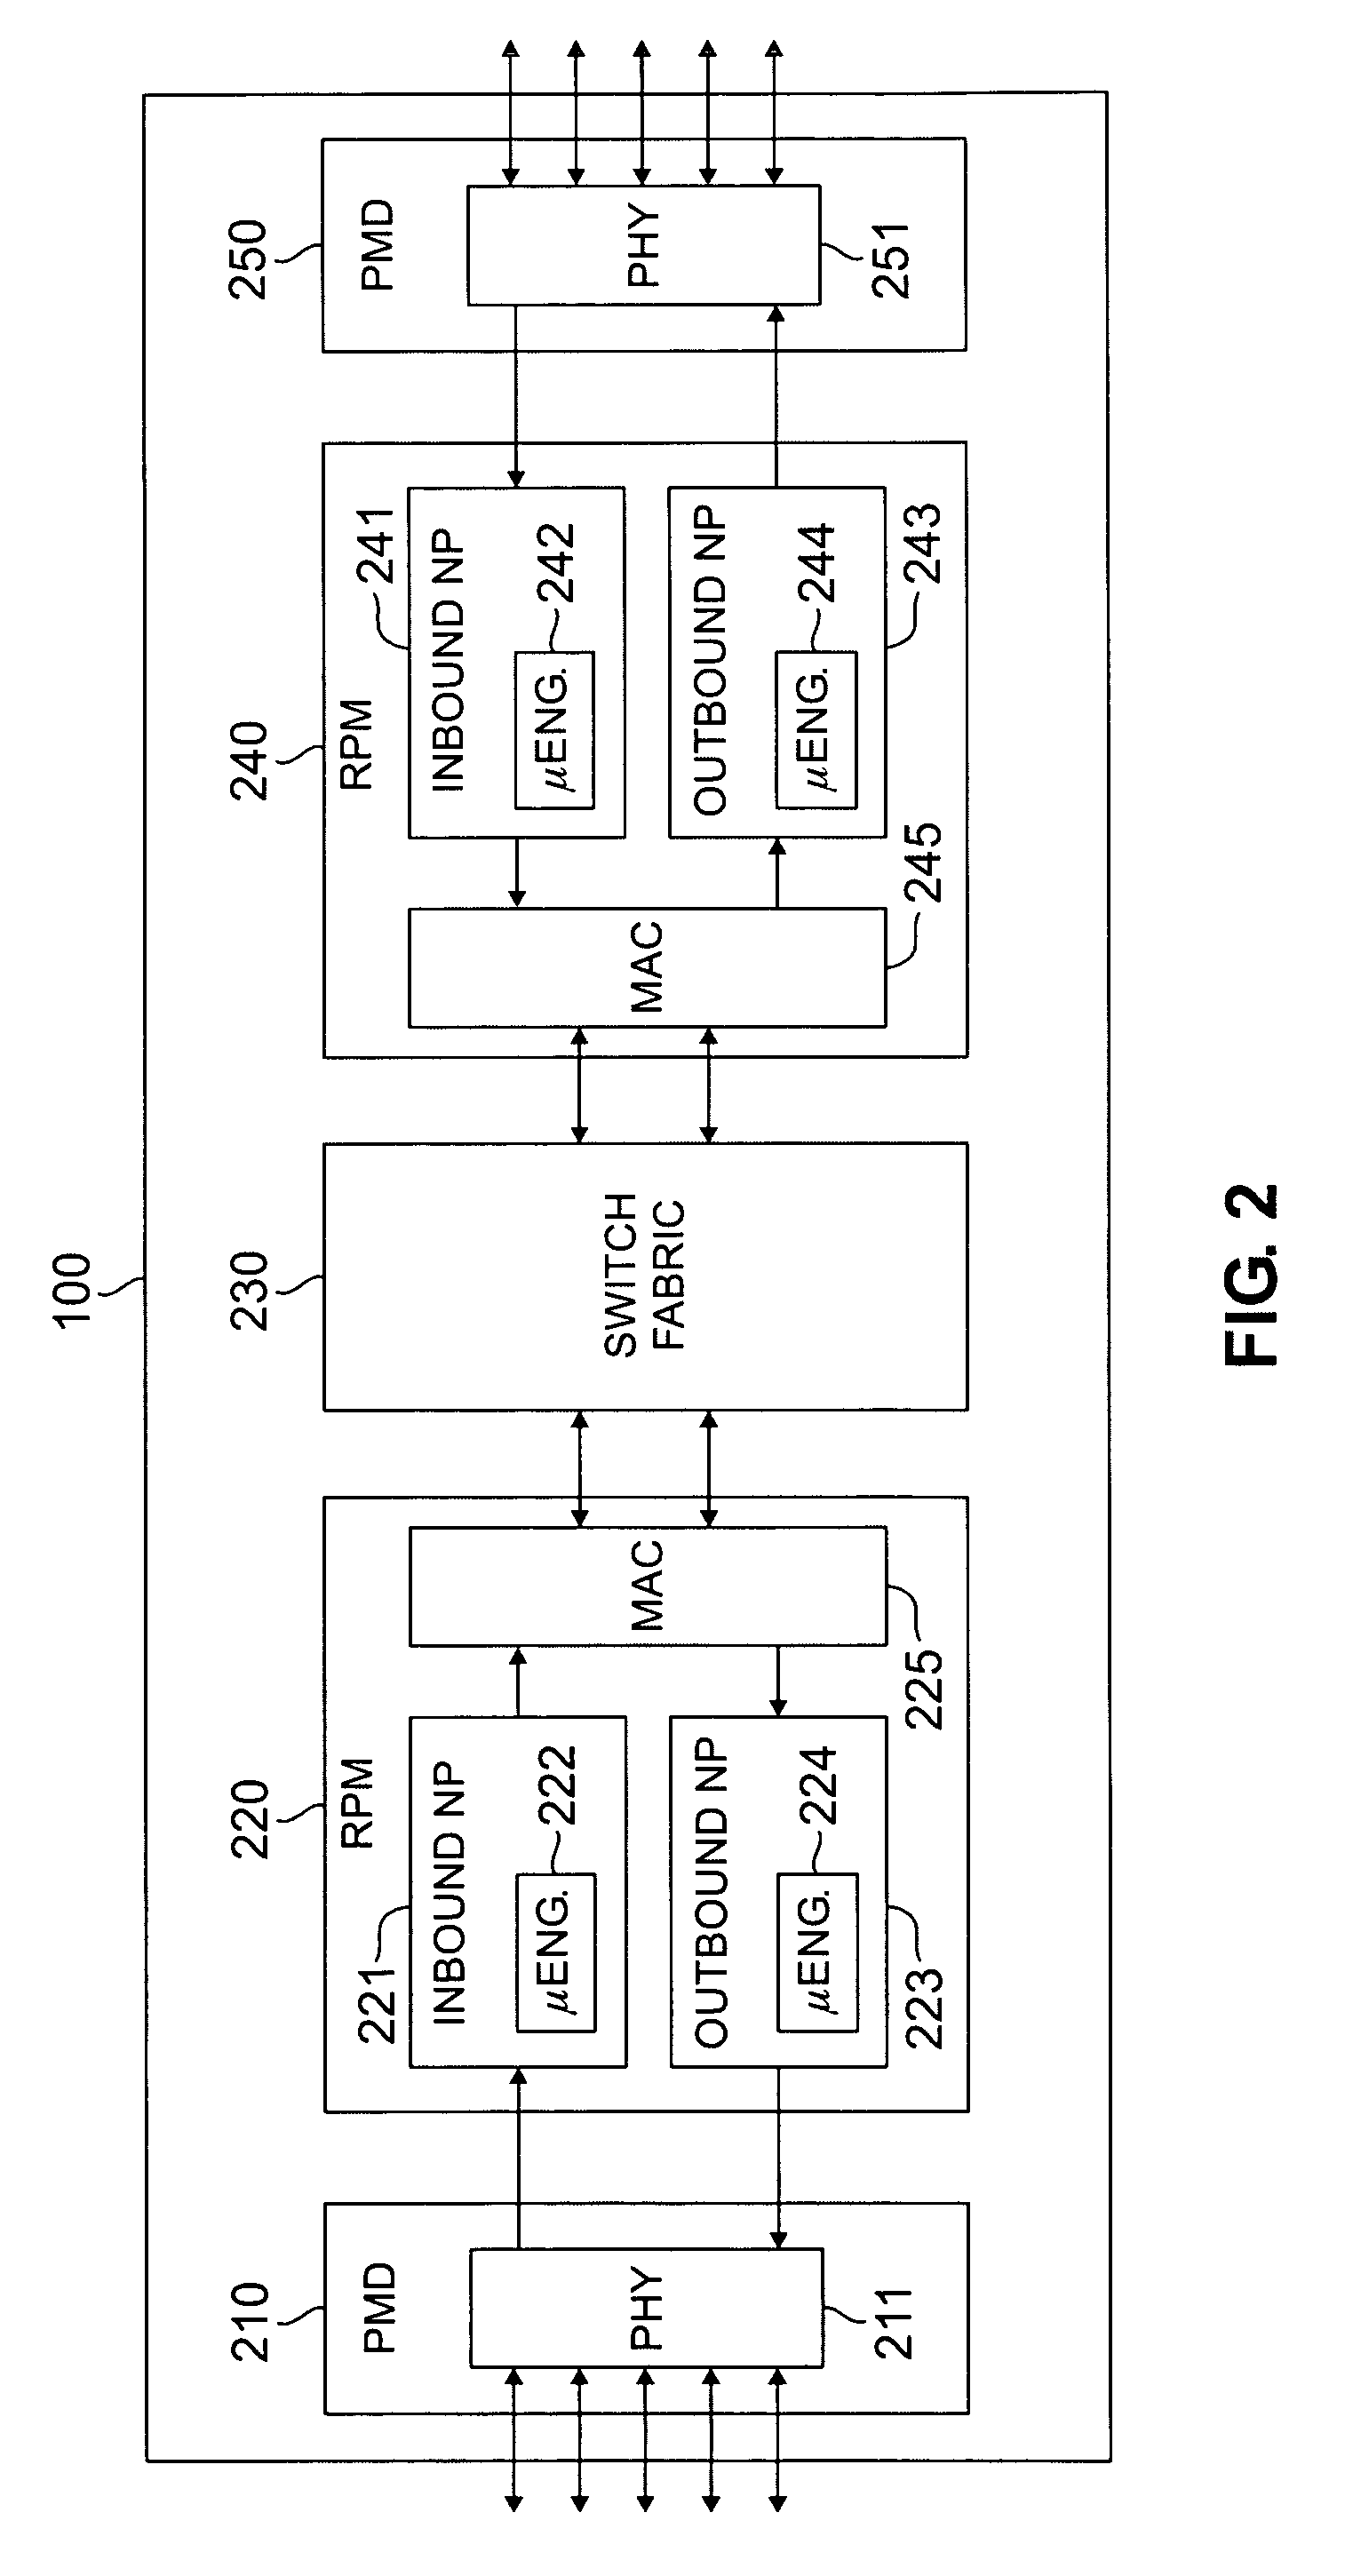 Apparatus and method for route summarization and distribution in a massively parallel router